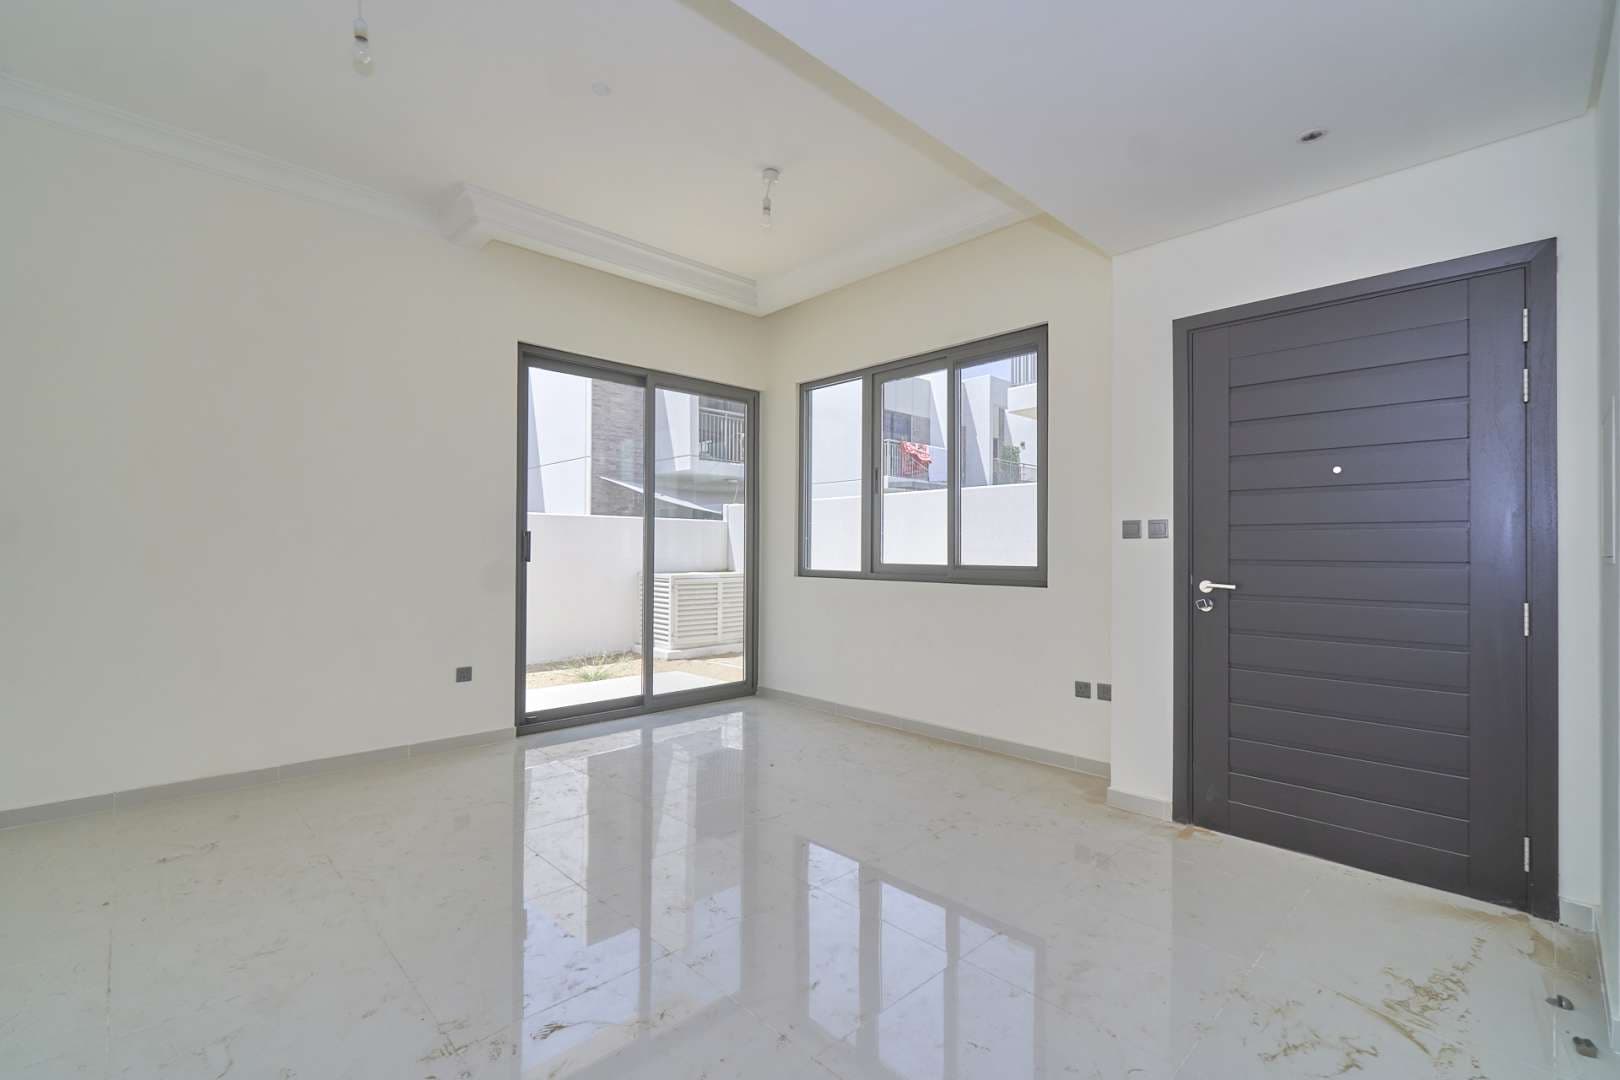 3 Bedroom Townhouse For Rent Aster Lp07338 26d8bc99383c6600.jpg